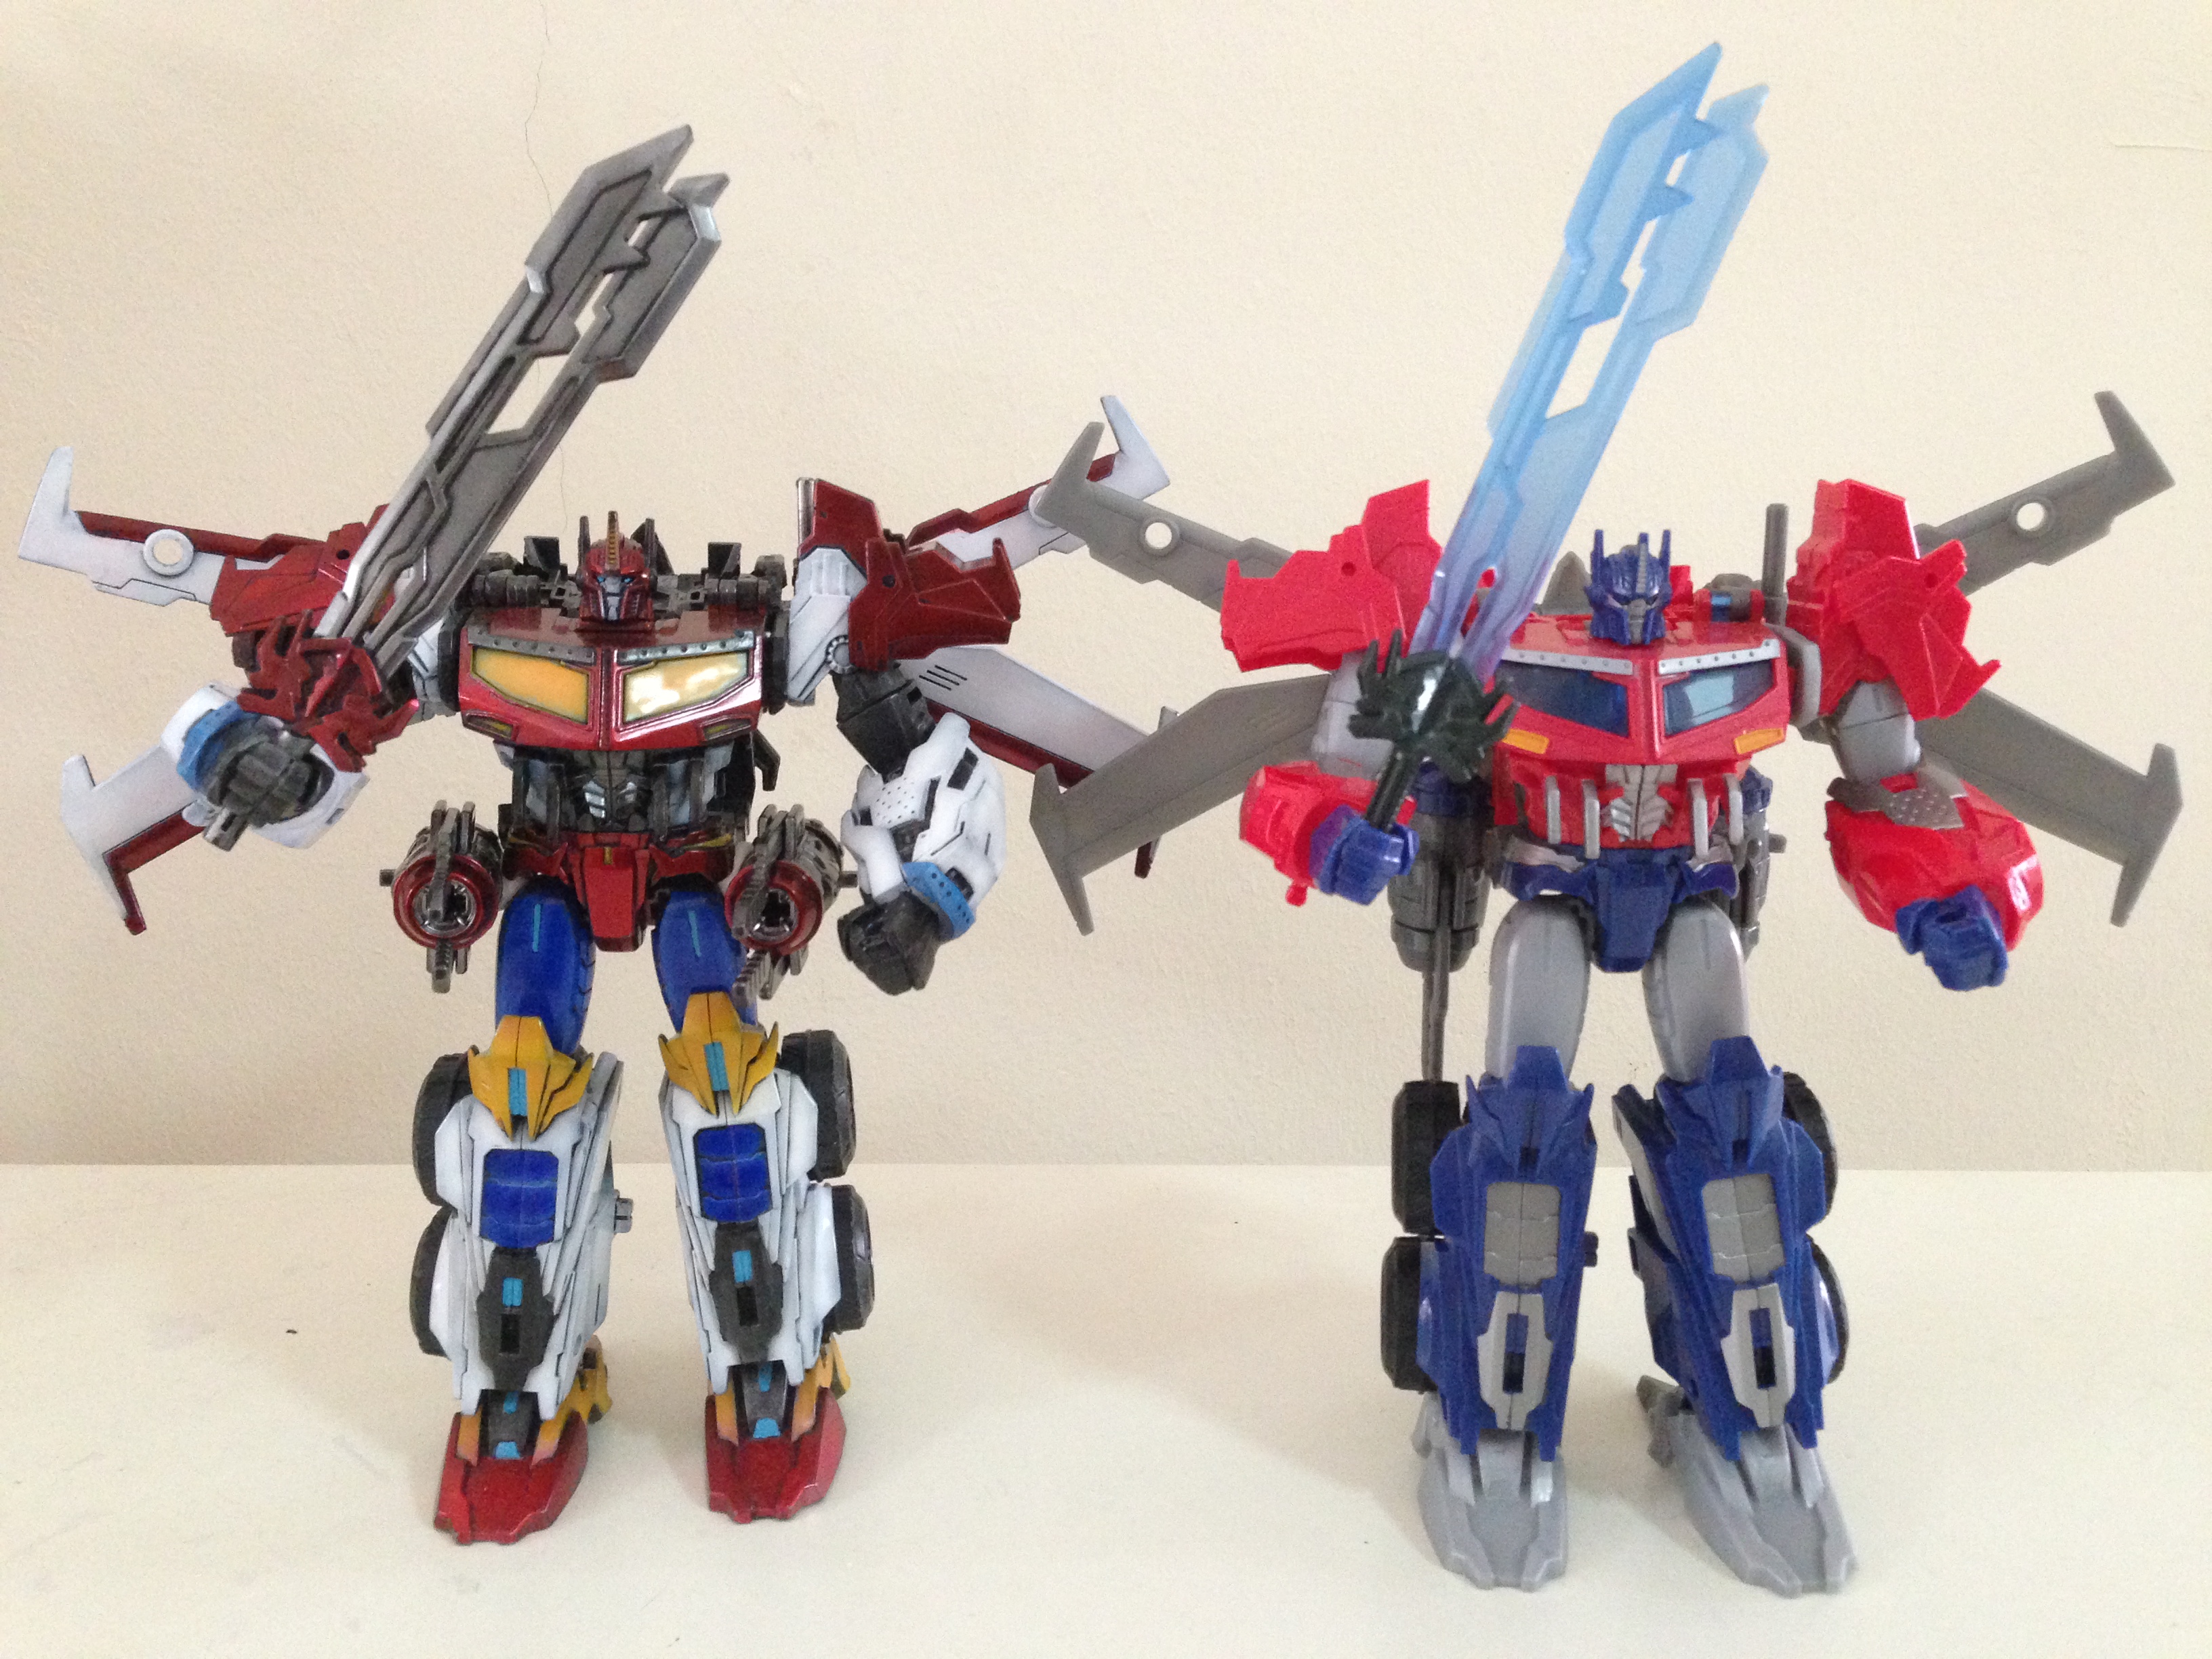 Fully decked out Victory Saber & Beast Hunters Optimus Prime!